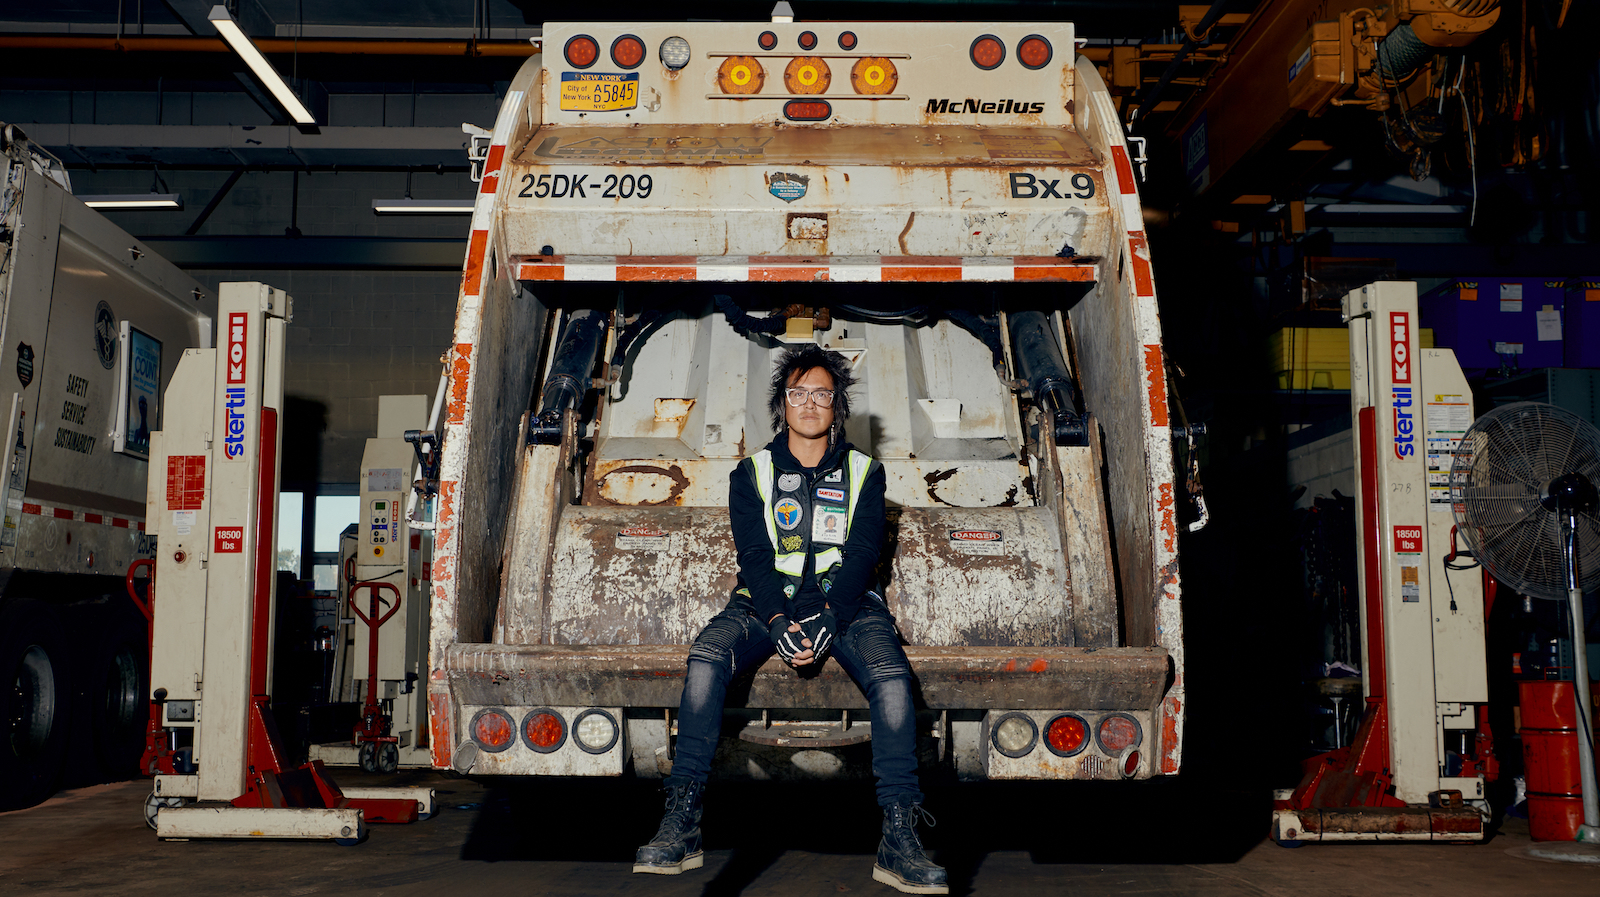 A man in glasses sits in the back of a garbage truck in a garage looking at camera